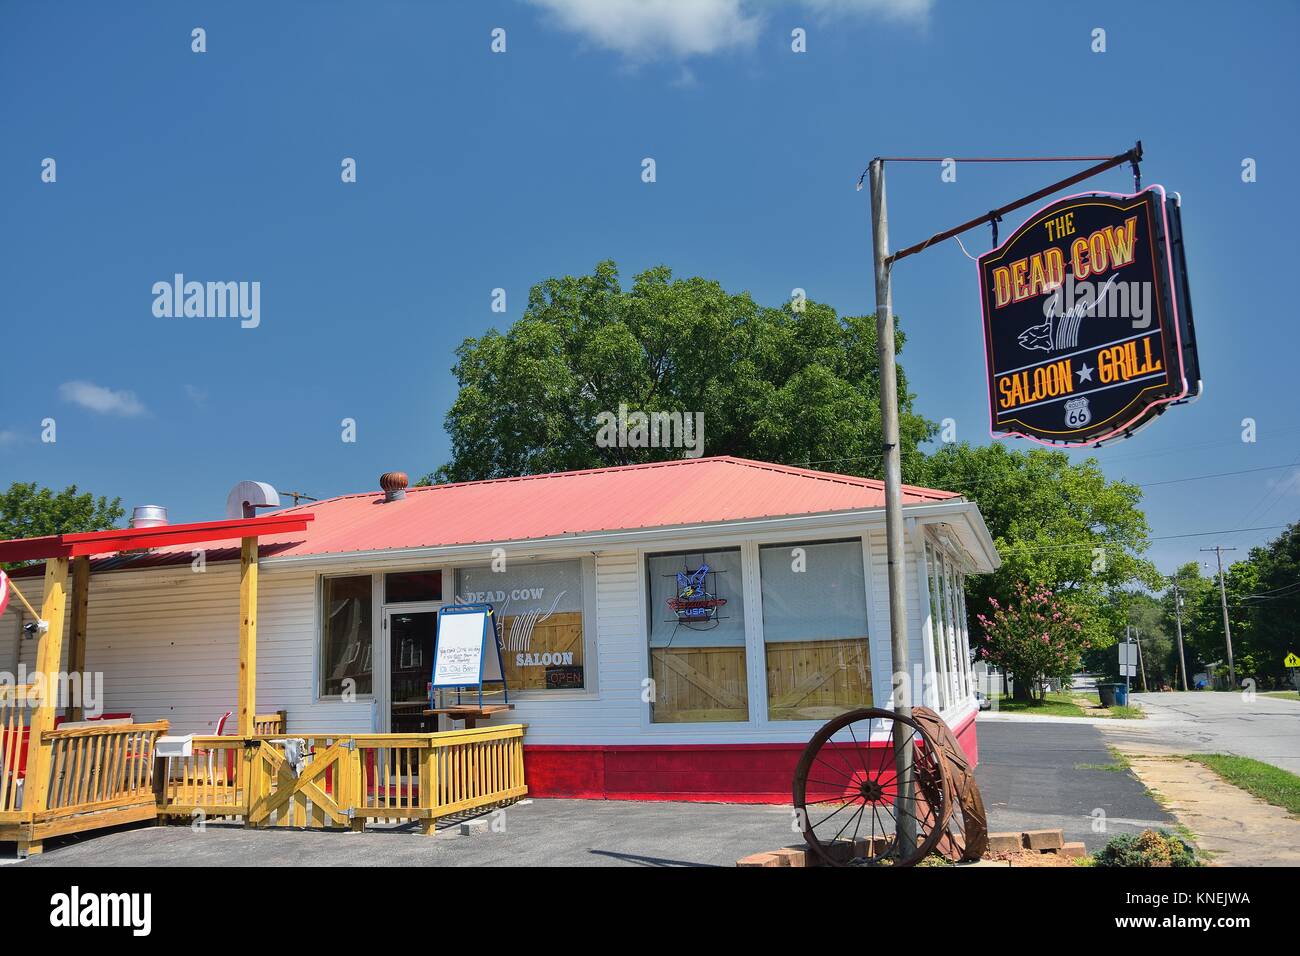 Carterville, Missouri - July 19, 2017: The Dead Cow Saloon and Grill is a famous location on Route 66 as it passes through Missouri. Stock Photo